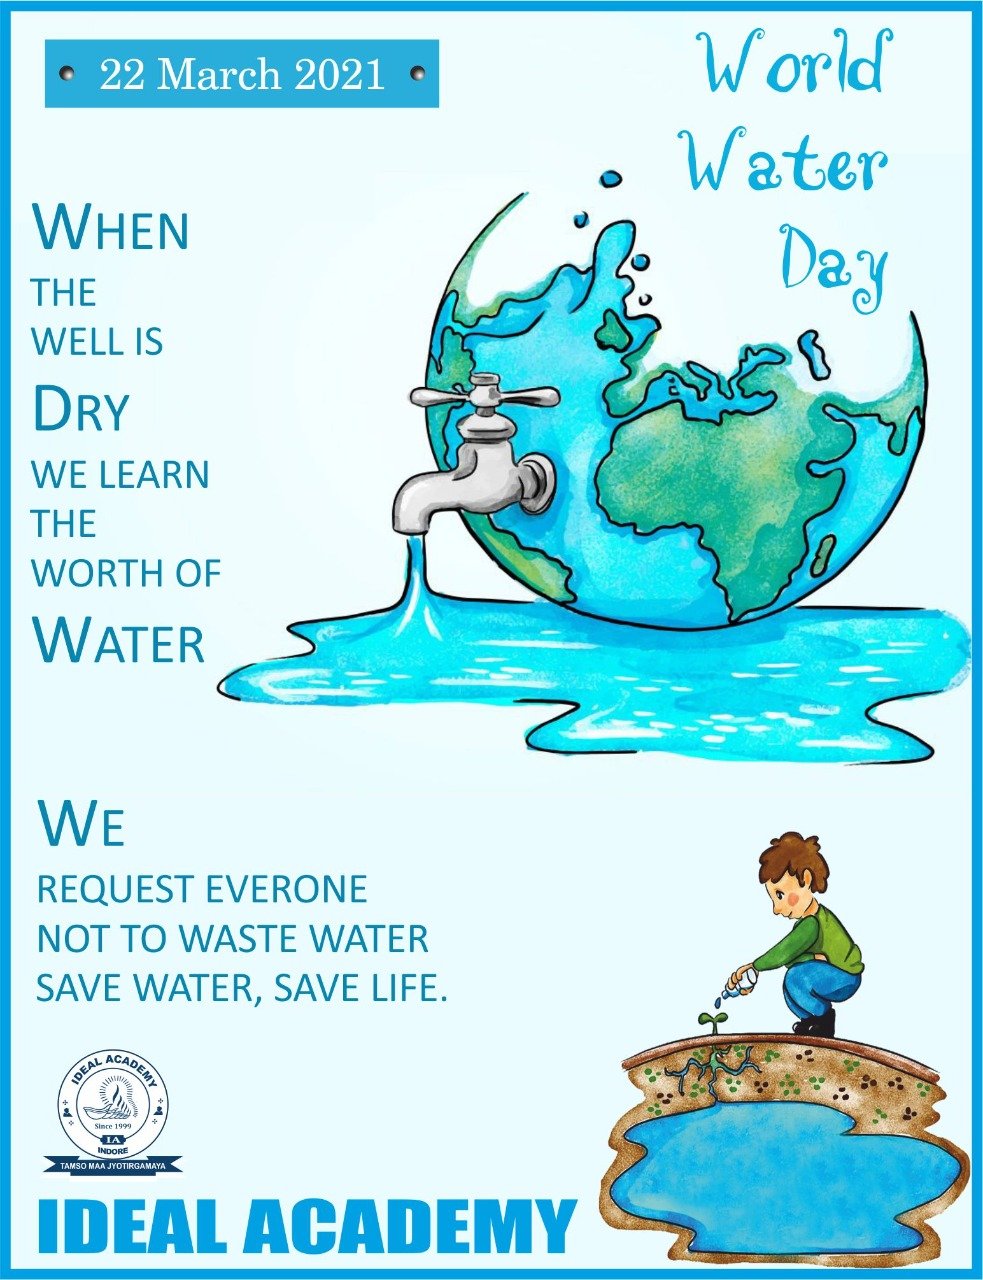 World Water Day - Ideal Academy